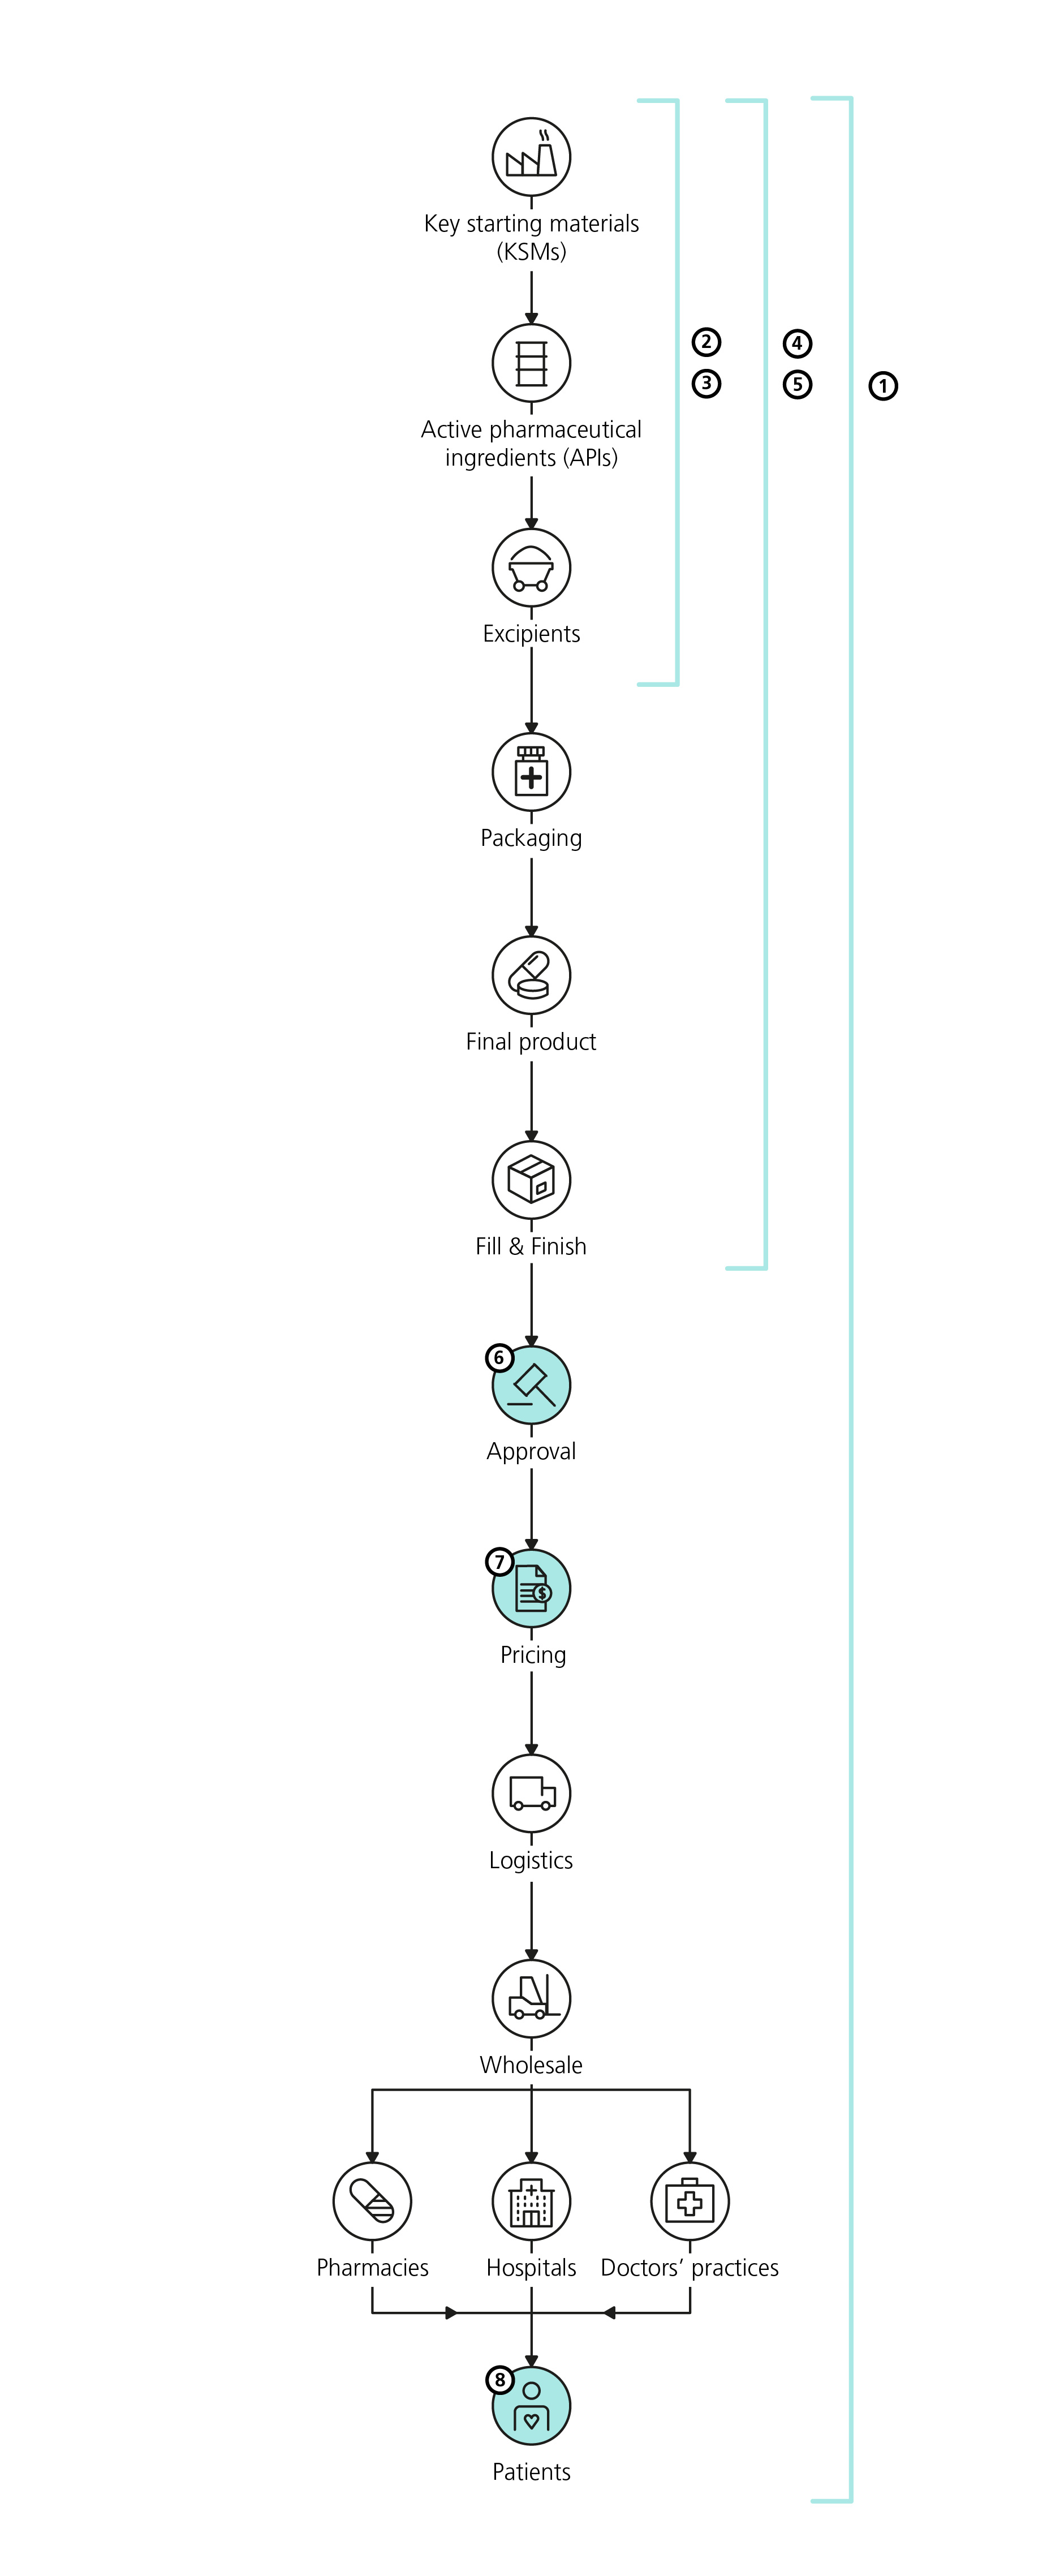 The vertical flowchart illustrates the medicine supply chain, whose 12 steps run from top to bottom. Each step and its icon follows the other: a) Key starting materials (KSMs), b) Active pharmaceutical ingredients (APIs), c) Excipients, d) Packaging, e) The final product, f) Fill & finish, g) Approval, h) Pricing, i) Logistics, j) Wholesale, k) Pharmacies, hospitals and doctors’ practices (all the same step) and l) Patients.   The flowchart also features the numbers 1 to 8, which each stand for a possible cause of supply chain disruption, and whose placement in the chain indicates where this may occur. These causes are described at length on the webpage after the flowchart illustration. Cause 1 has an impact throughout the supply chain. Causes 2 and 3 can extend over the first three supply chain steps of KSMs, APIs and Excipients. Causes 4 and 5 may extend over the first six supply chain steps, up to and including Fill & finish. Cause 6 relates to the Approval step, Cause 7 applies to Pricing and Cause 8 relates to the Patients.  This presentation permits a more detailed examination of what may cause disruptions to supplies at the various stages along the medicine supply chain.